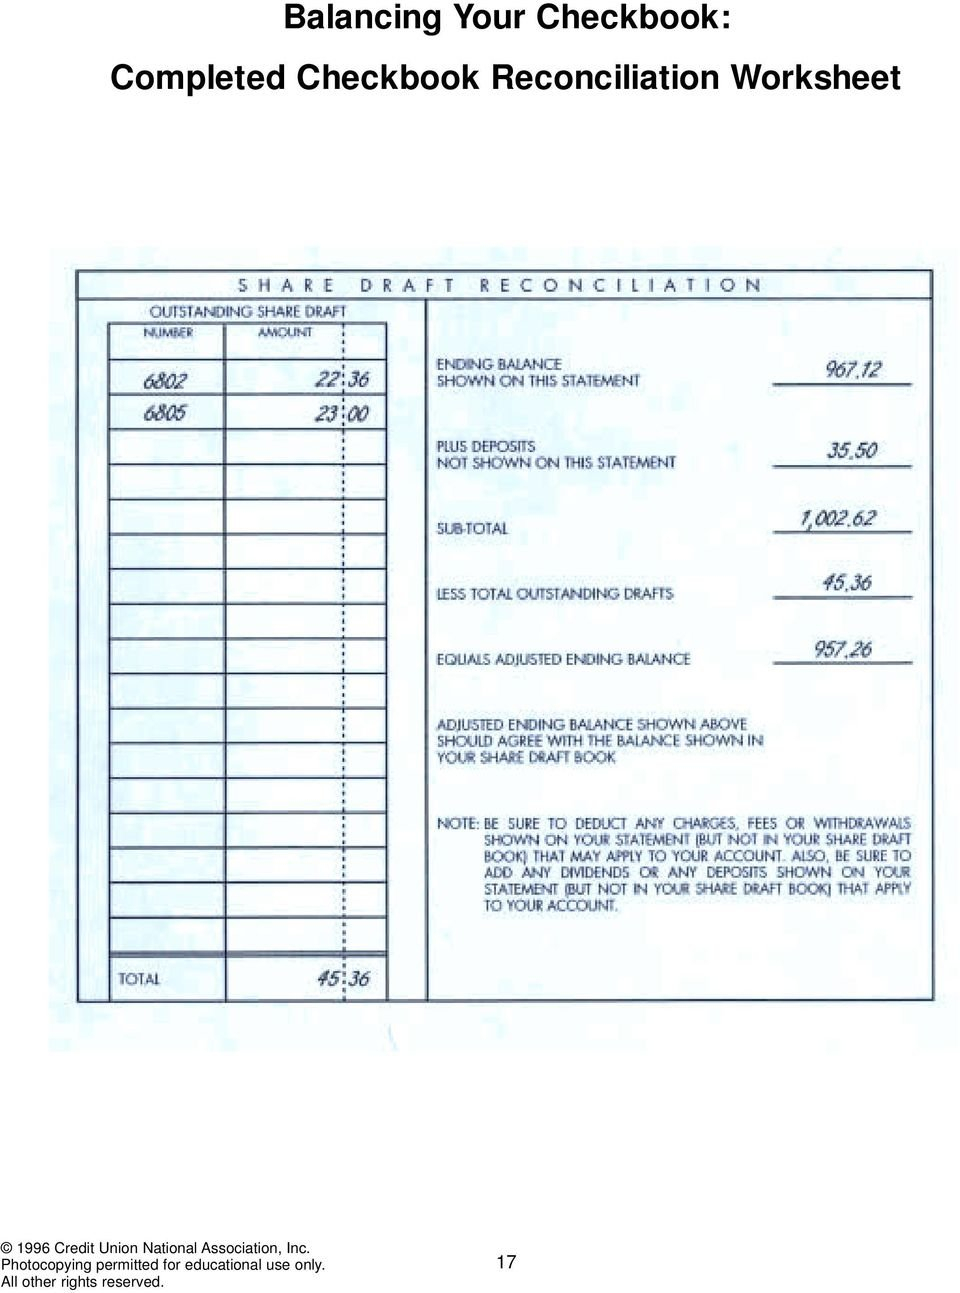 Share Draftchecking Account Basics  Pdf For Balancing A Checkbook Worksheet For Students